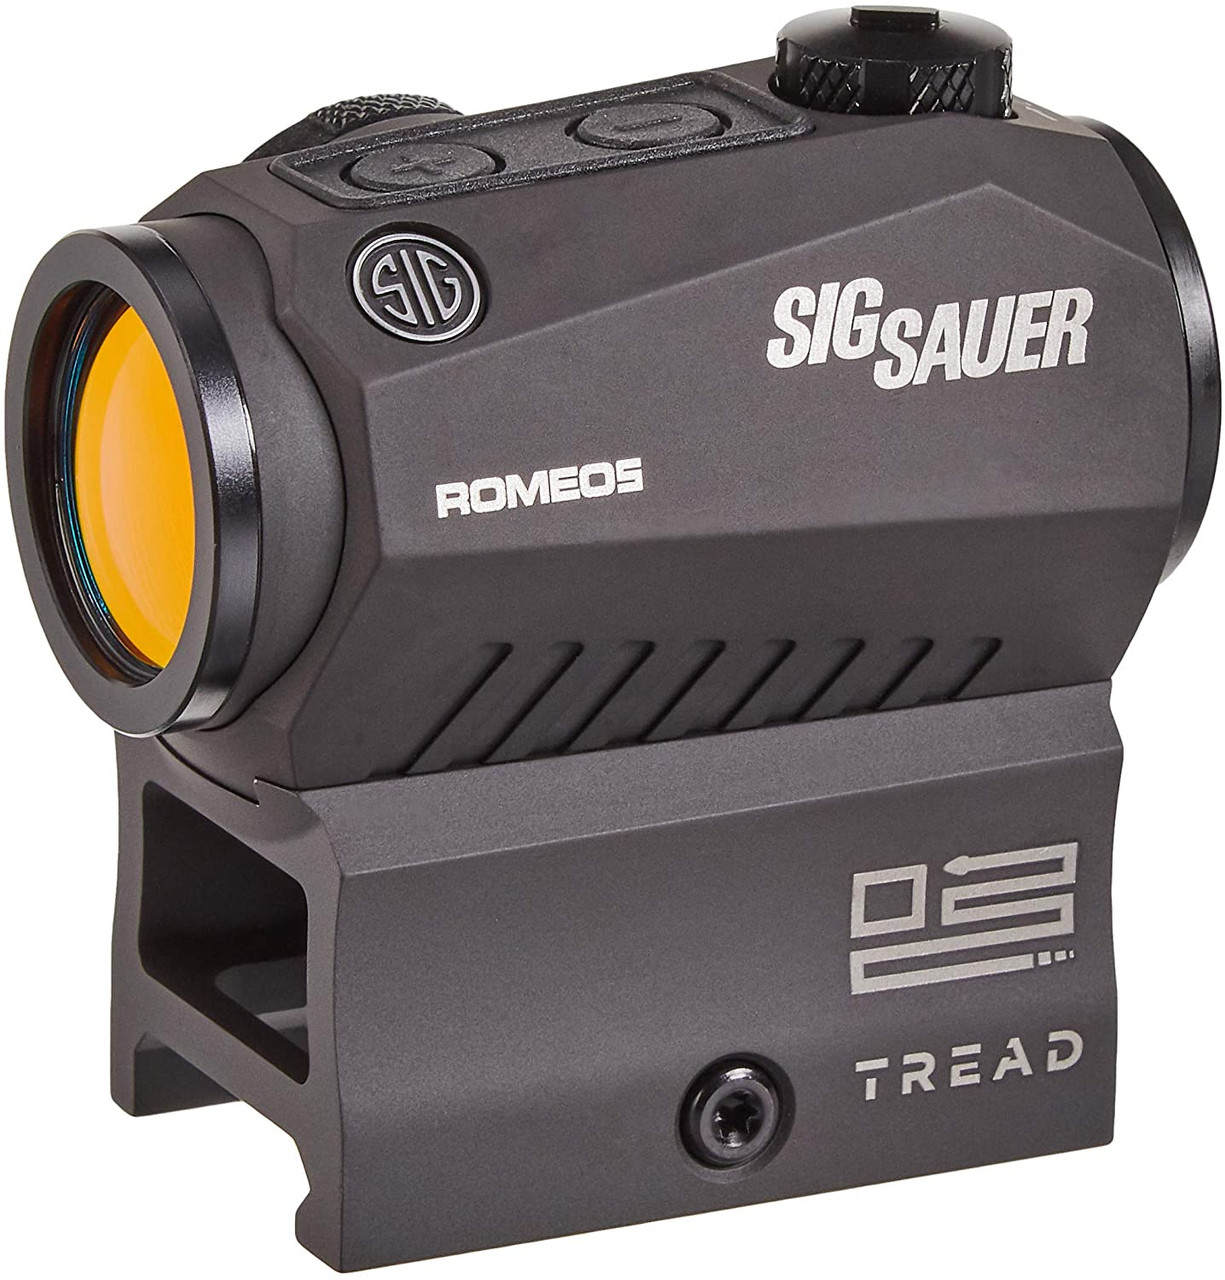 LayLax [SIG SAUER] Romeo5 1x20mm Compact Red Dot SOR52010 